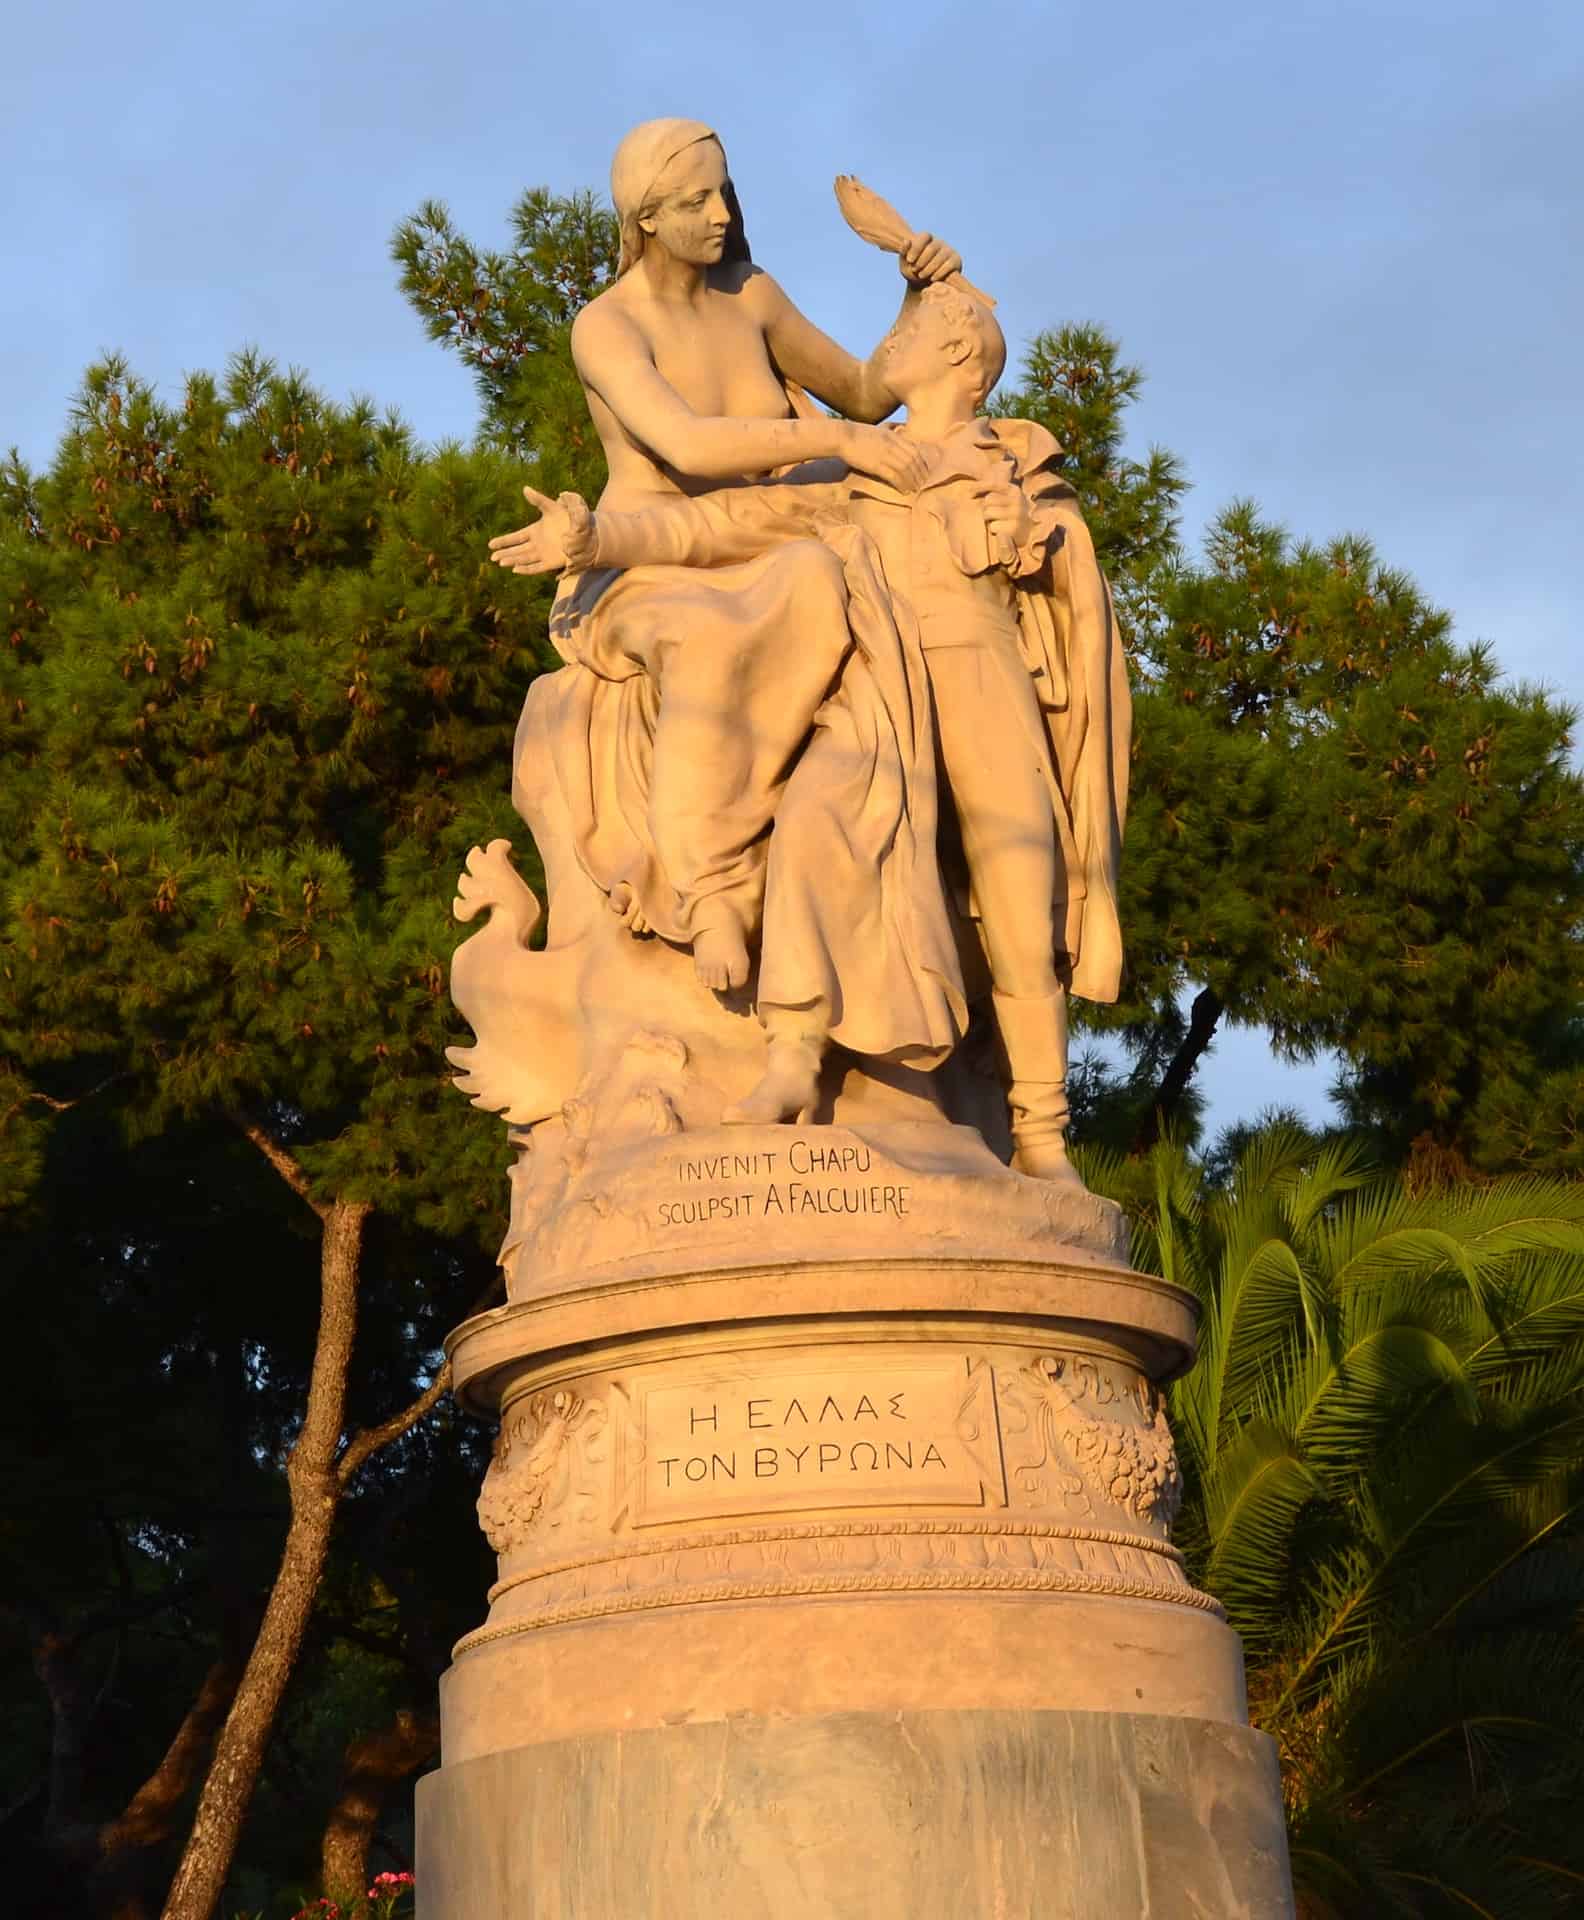 Lord Byron statue at the Zappeion Gardens in Athens, Greece